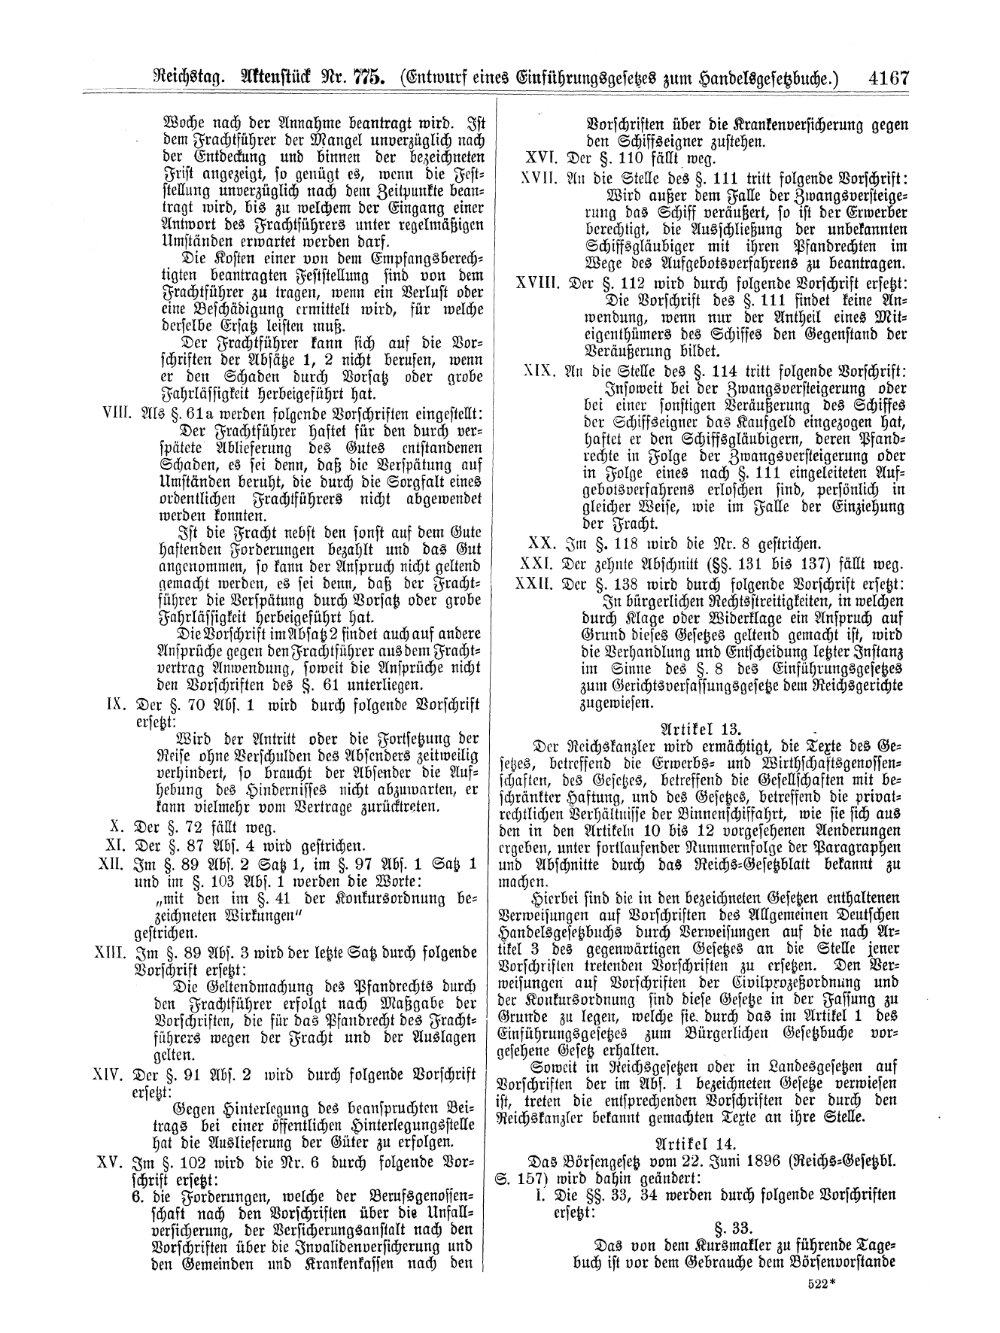 Scan of page 4167